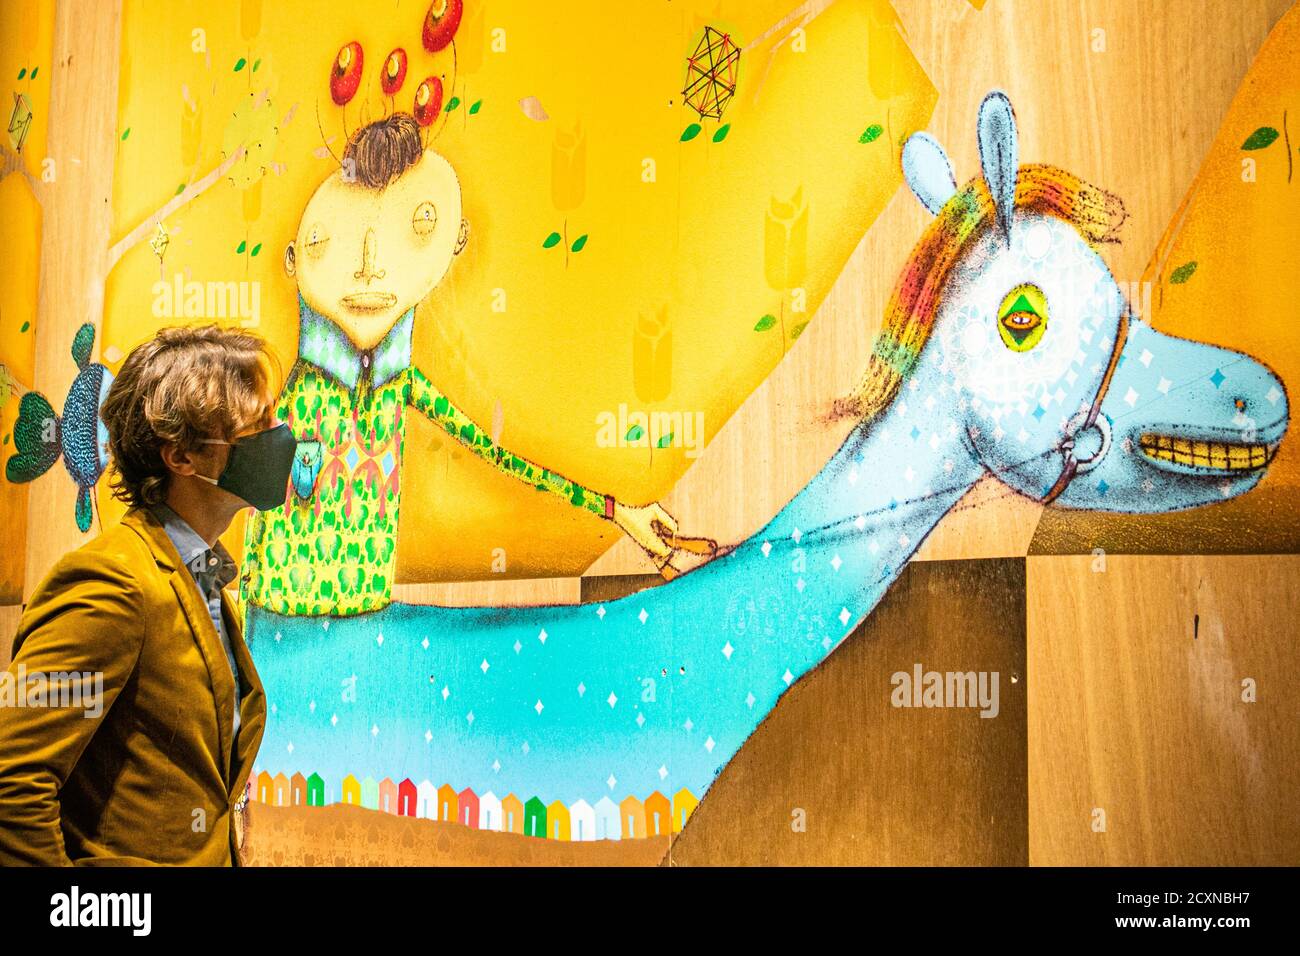 BONHAMS LONDON,UK 1 October 2020. OSGEMEOS (Brazilian, born 1974) Horse (Caballo Marino) in three parts, 2008. Estimate: £ 80,000 - 120,000. Press preview Bonhams new sale explores Pop, Street Art and the related art forms that swept across the world, influencing fashion, music, and youth culture. Credit: amer ghazzal/Alamy Live News Stock Photo